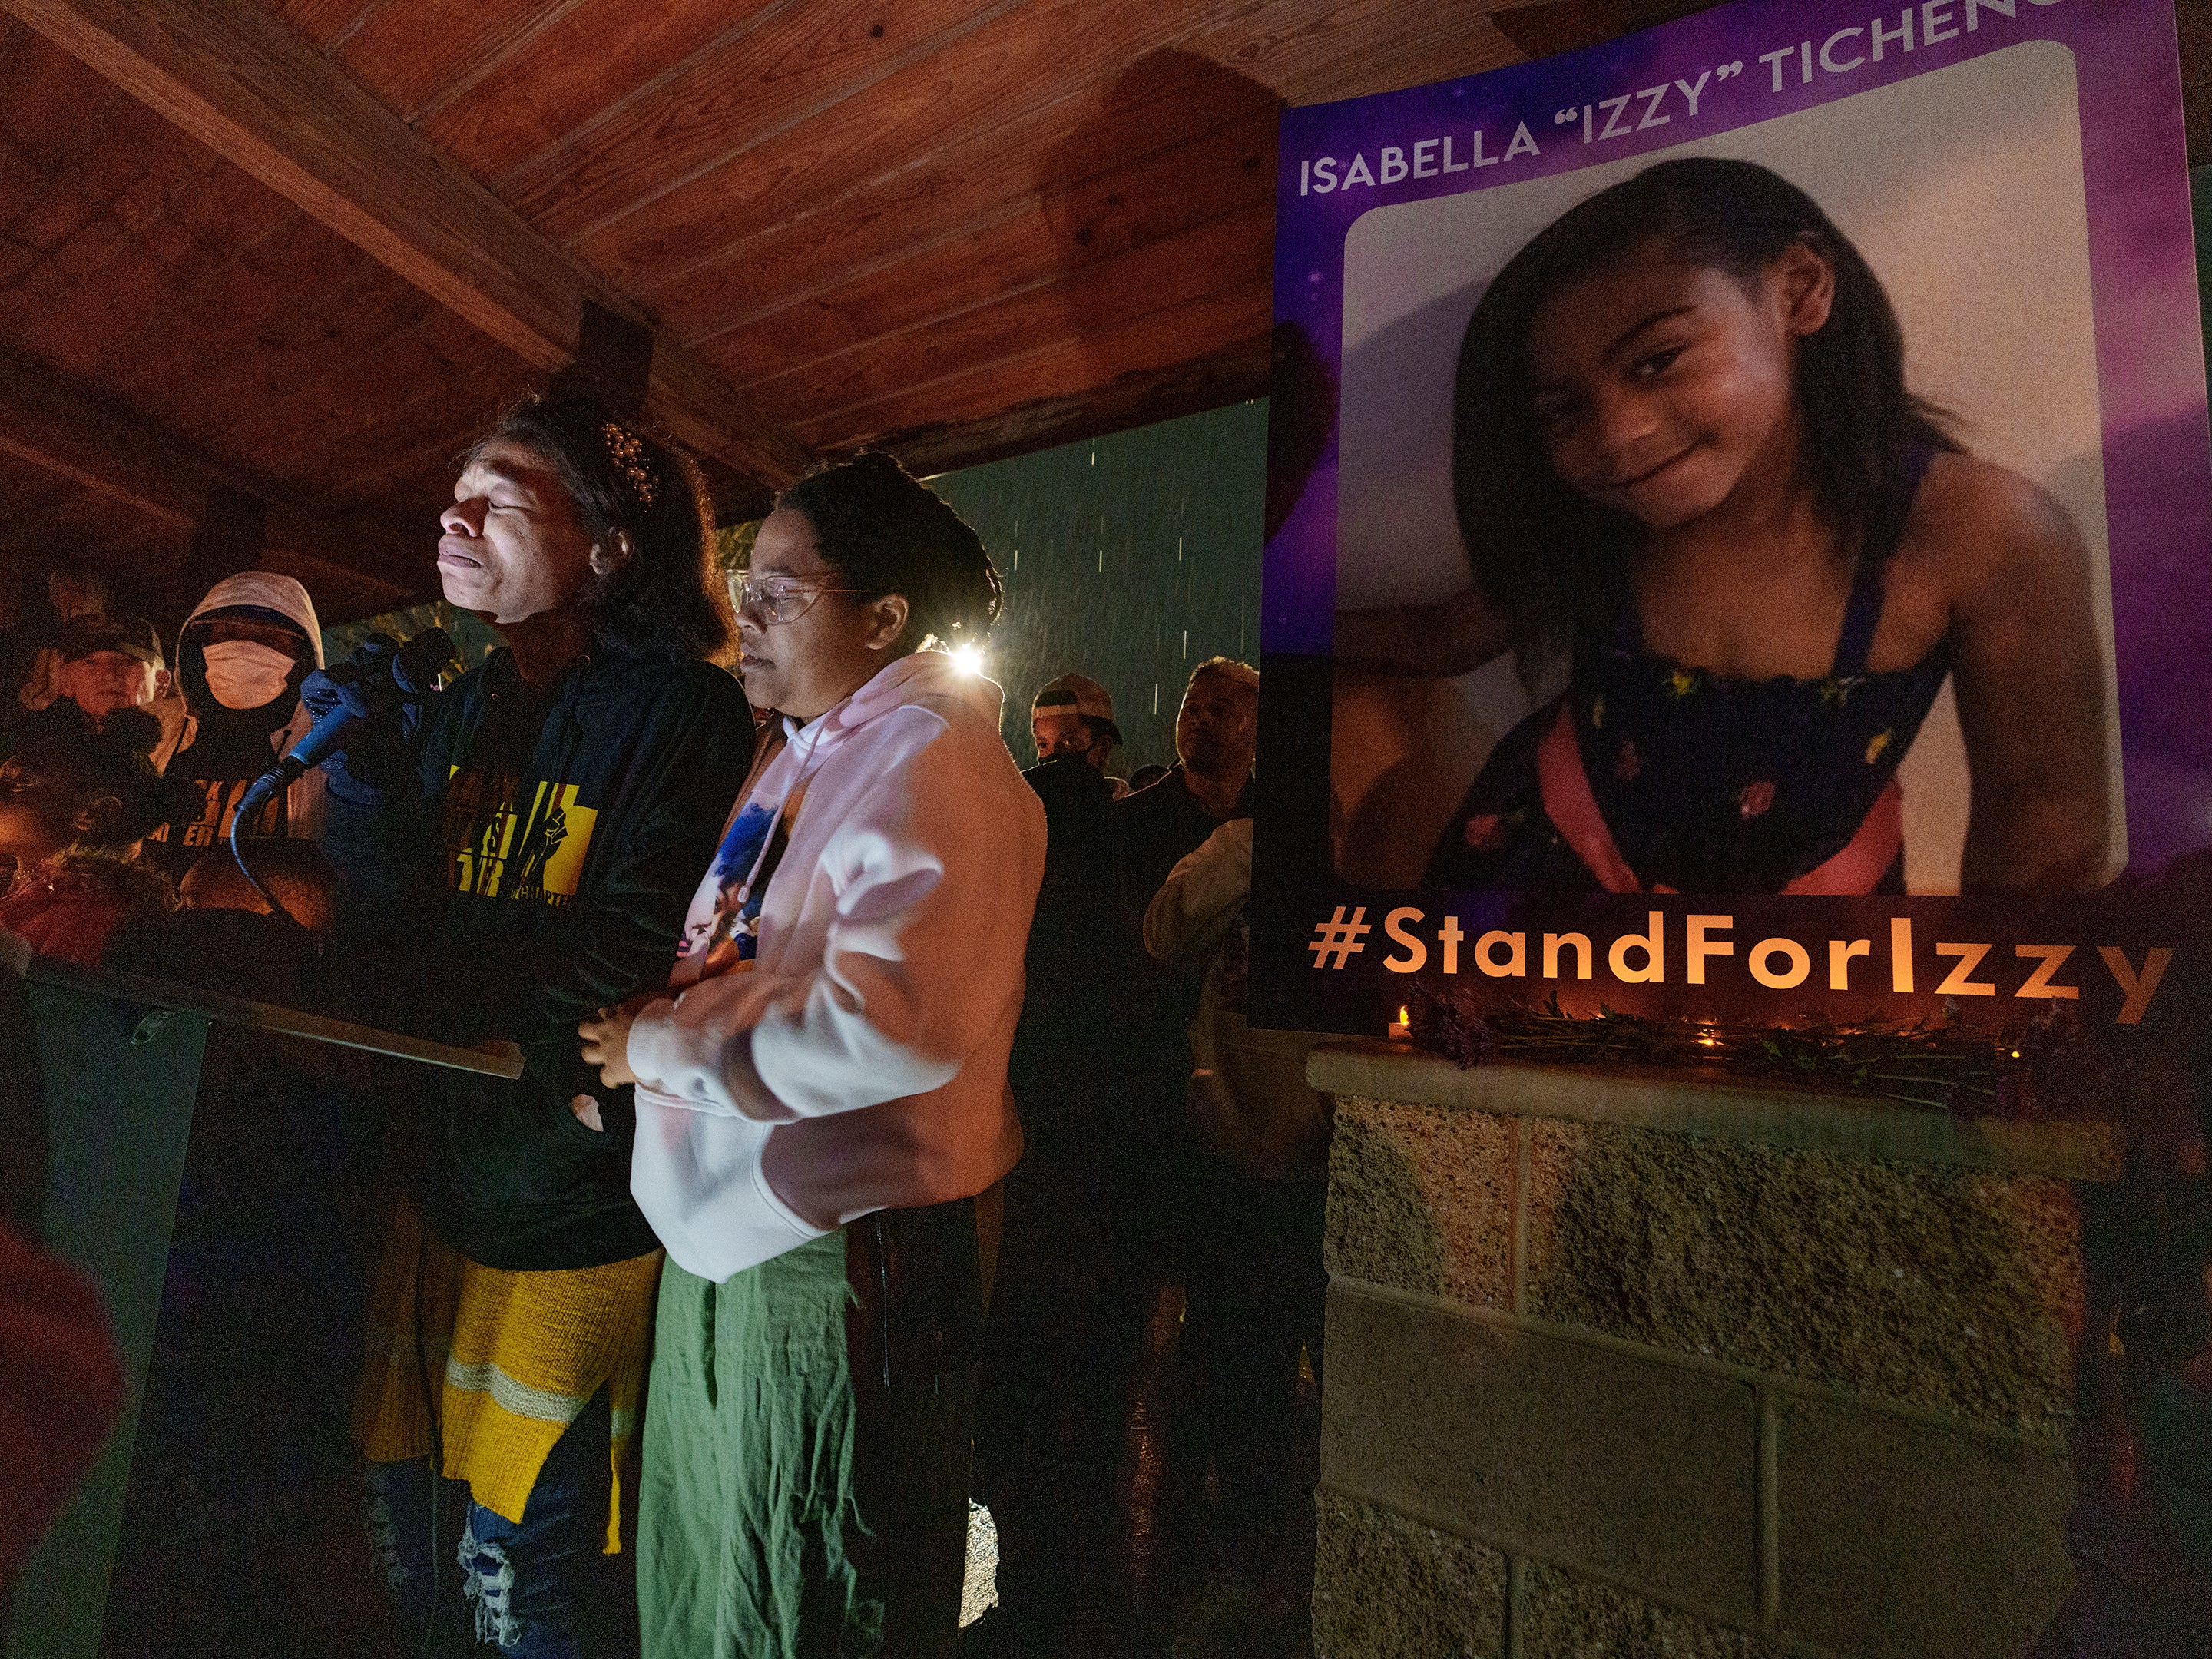 Brittany Tichenor- Cox joined by her sister Jasmine Rhodes, right, speaks about her daughter Izzy Tichenor, as hundreds joined the Tichenor family in mourning the death of 10-year-old Isabella "Izzy" Tichenor during a vigil at Foxboro Hollow Park in North Salt Lake, Utah, on Tuesday, 9 November 2021